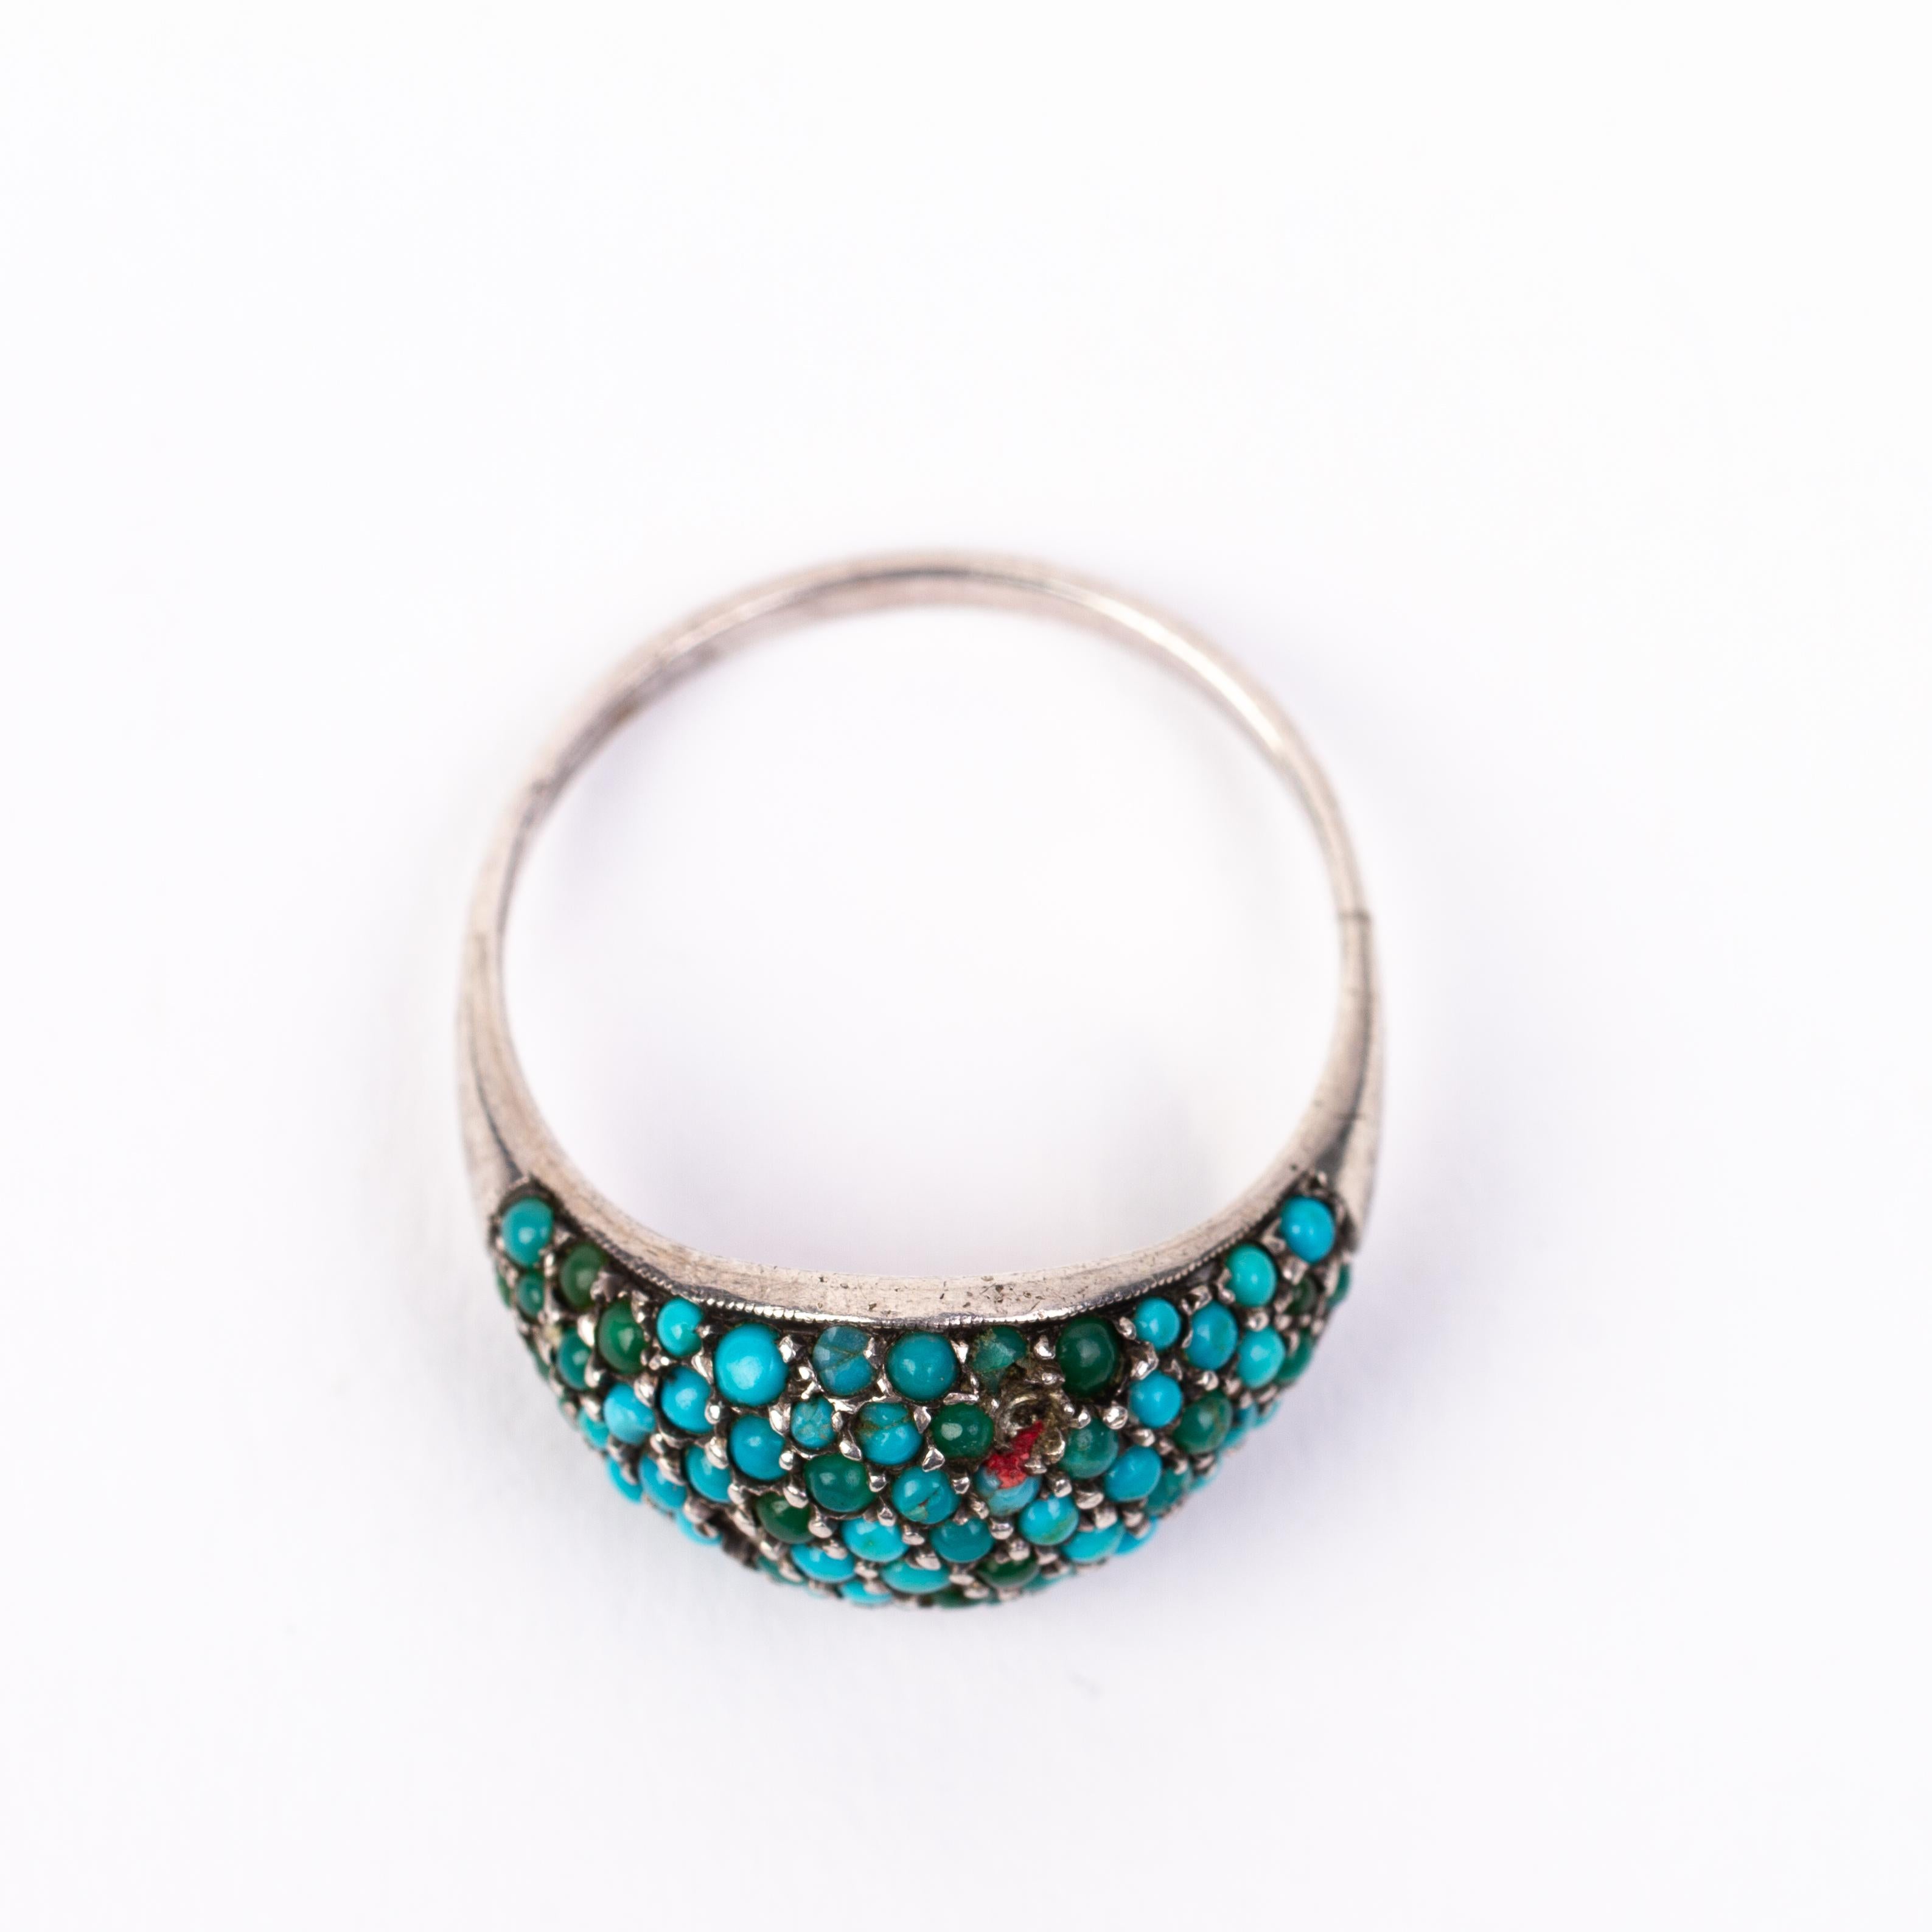 In good condition
From a private collection
Free international shipping
Missing two small turquoise beads
Turquoise Cluster Silver Ring